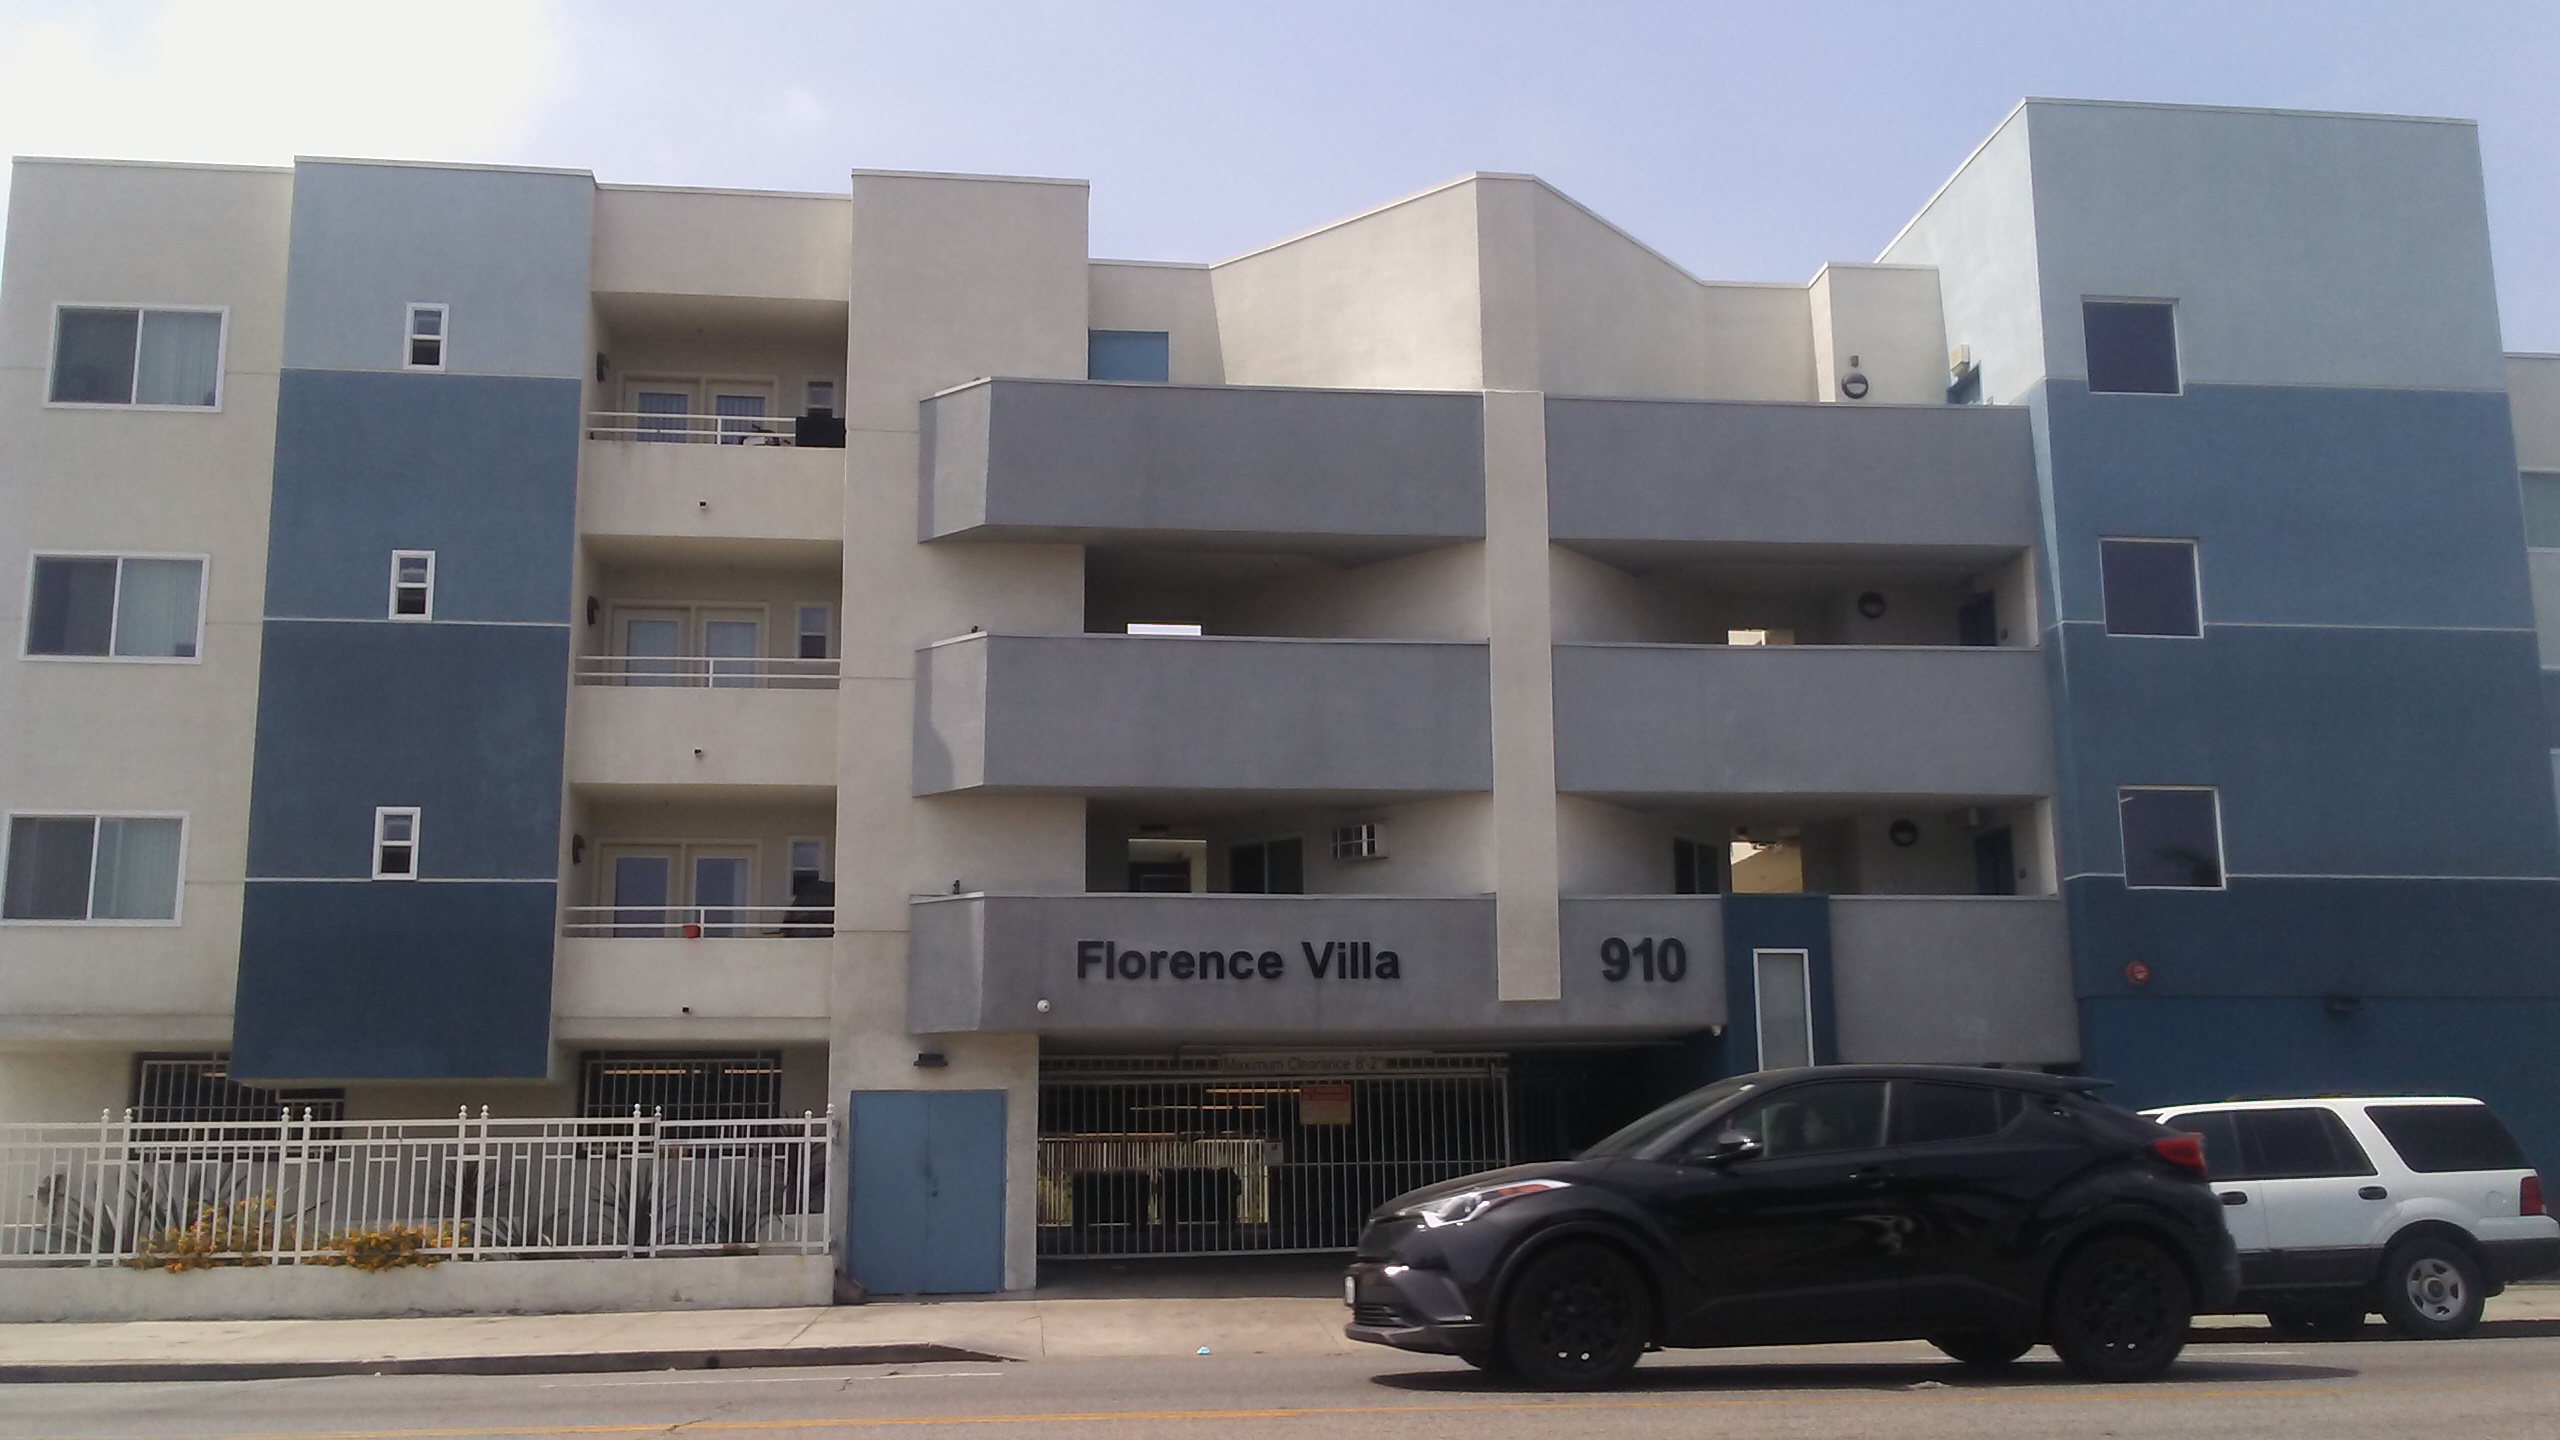 Street view of Florence Villa. Four story building with parking gargae. Units with balcony access.